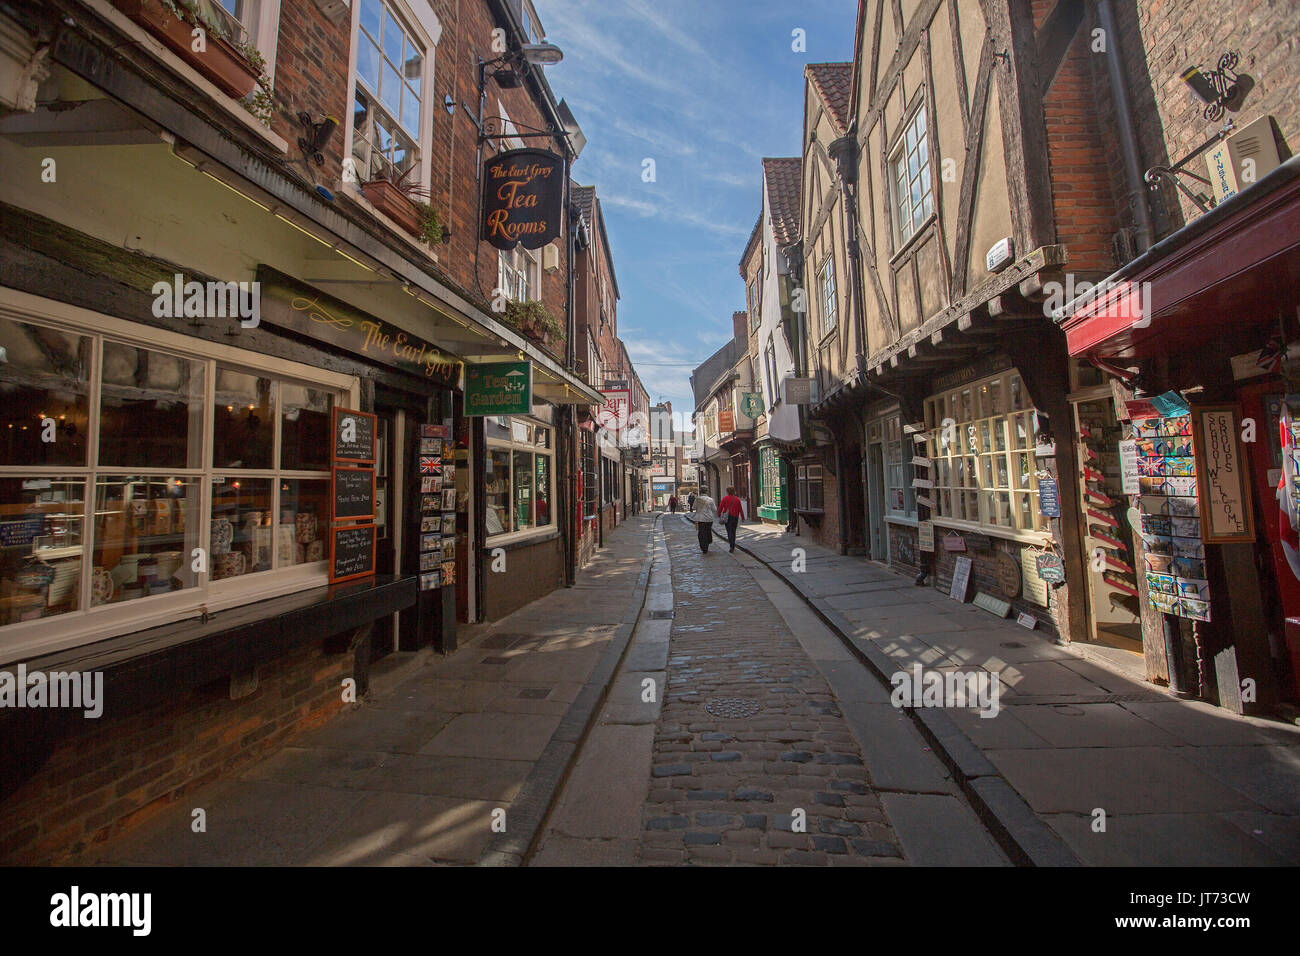 Historic shops lining ancient narrow cobbled street in The Shambles in city of York, England Stock Photo